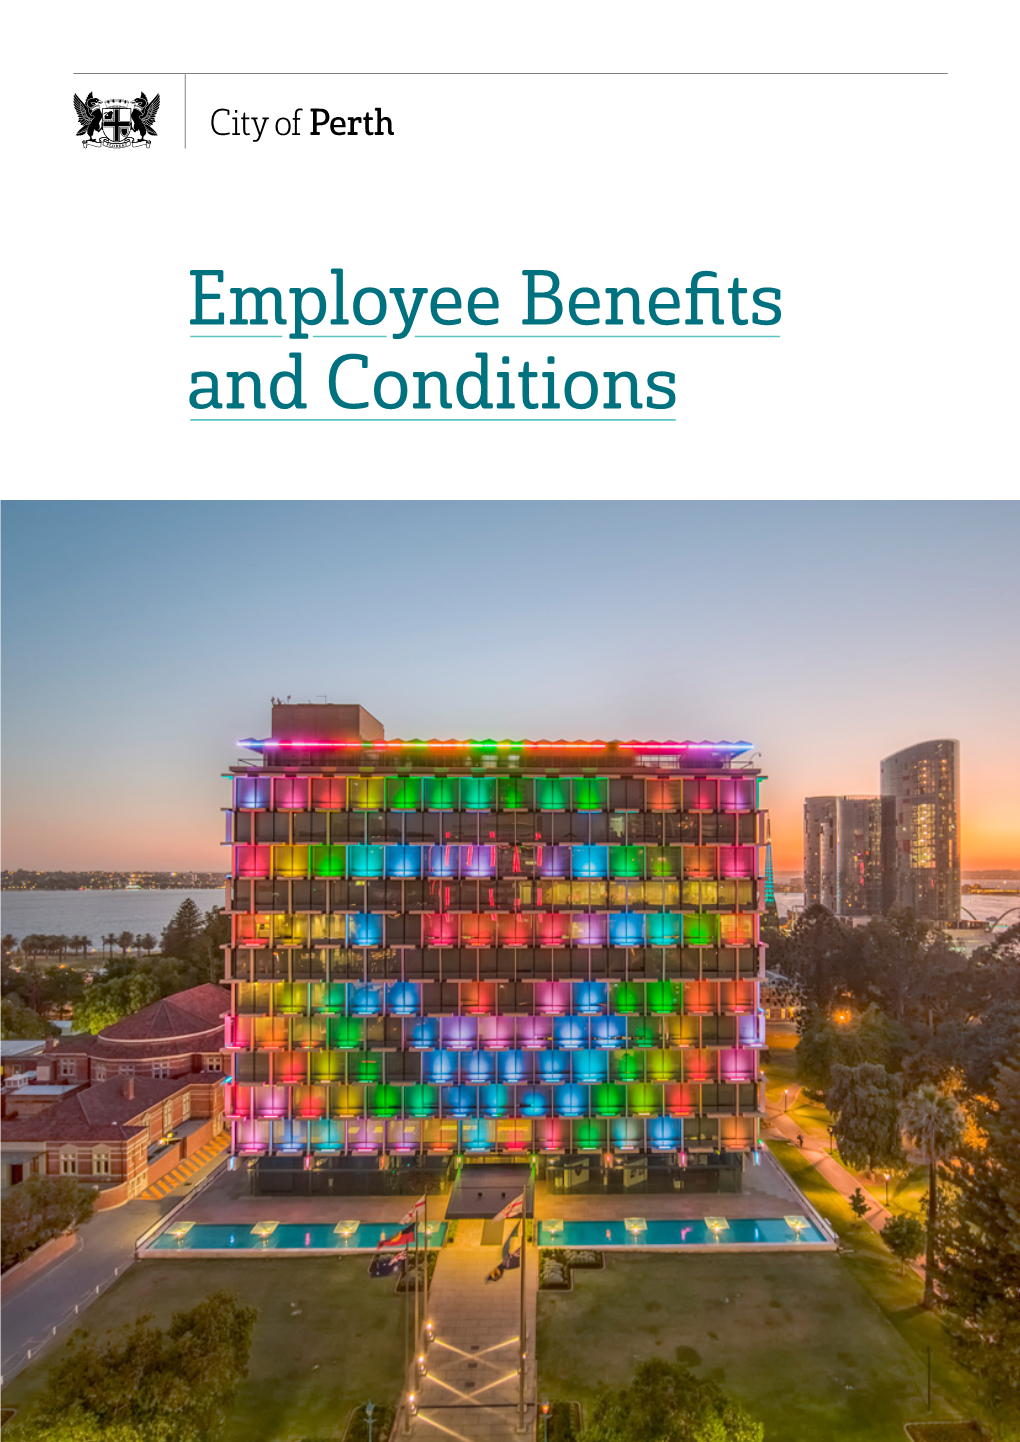 Employee Benefits and Conditions Working at the City of Perth